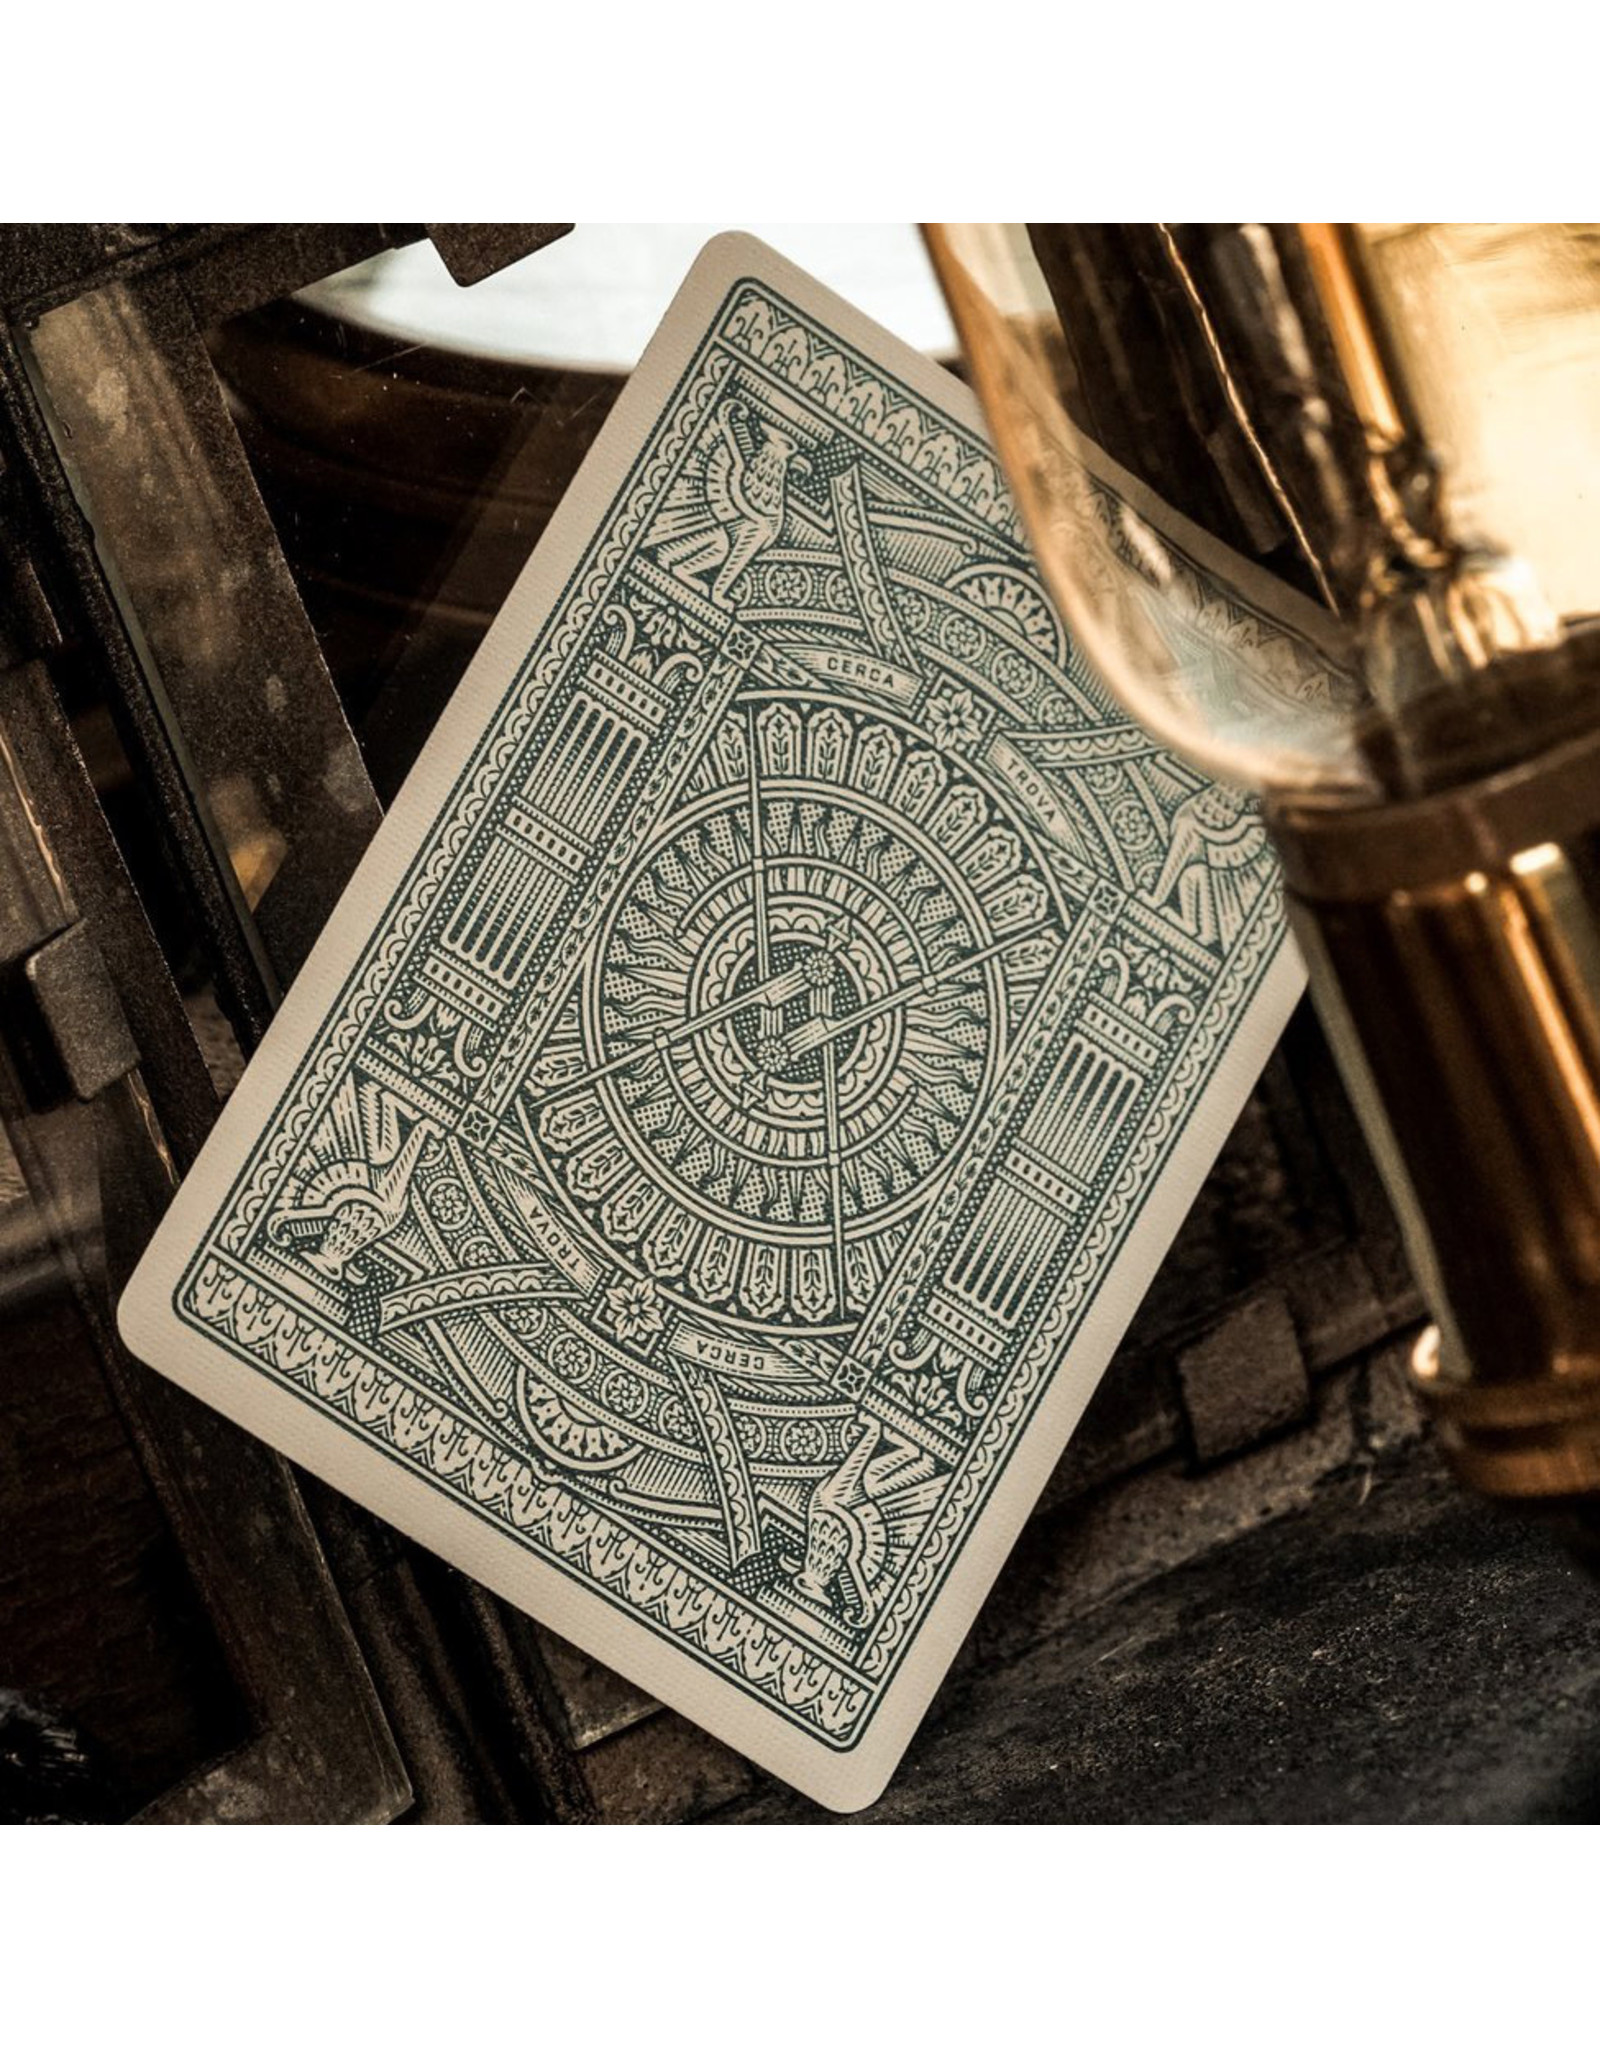 Theory 11 Hudson Playing Cards